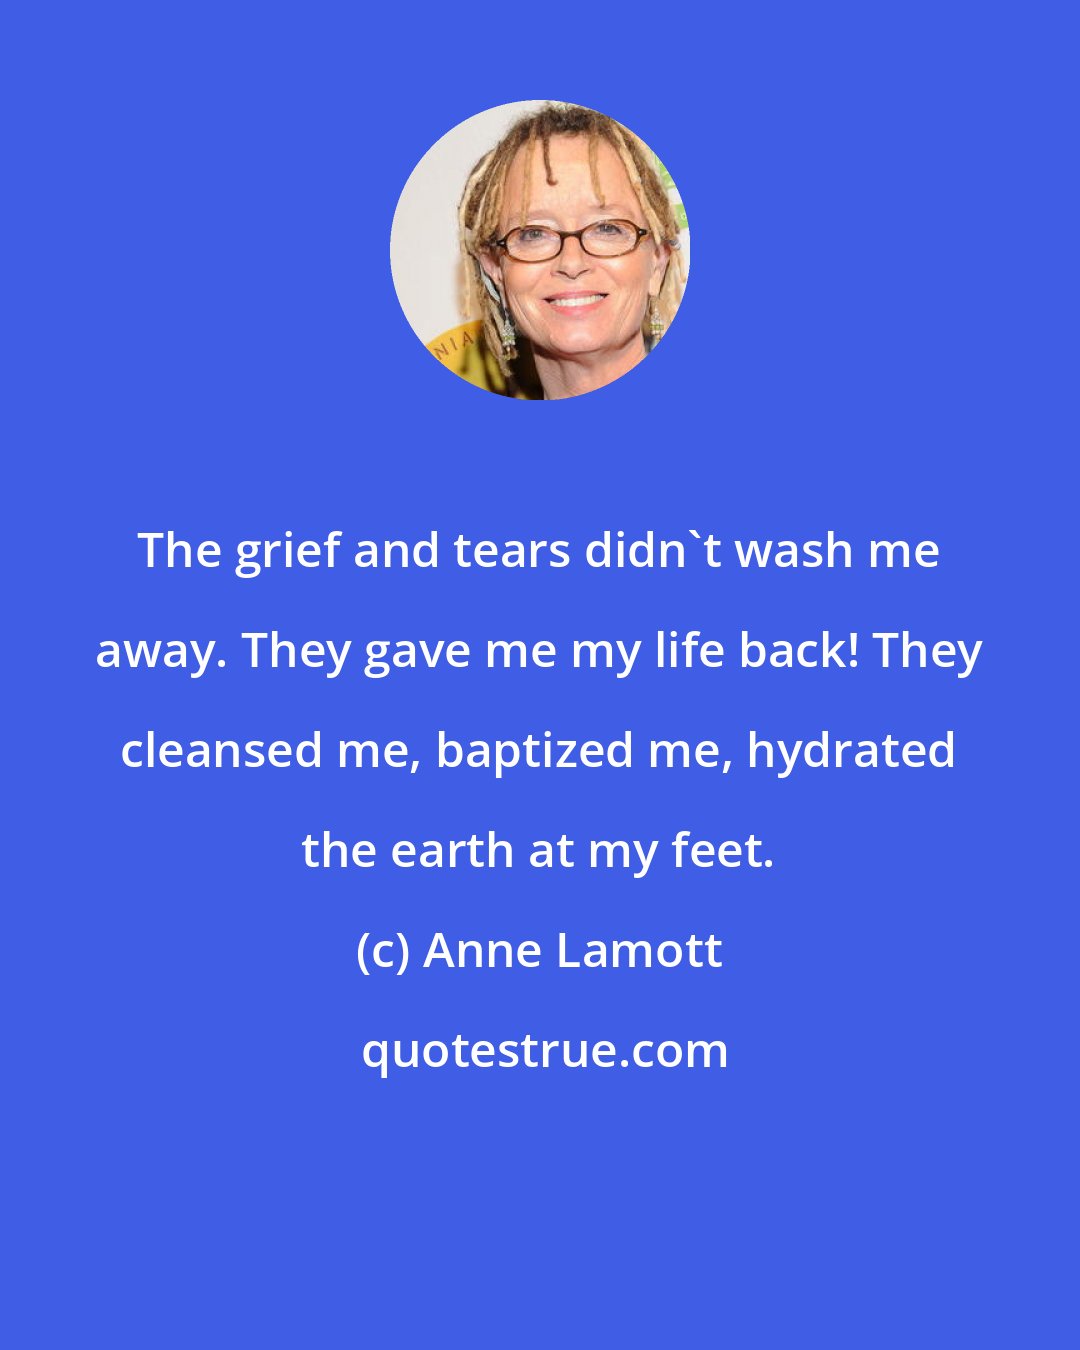 Anne Lamott: The grief and tears didn't wash me away. They gave me my life back! They cleansed me, baptized me, hydrated the earth at my feet.